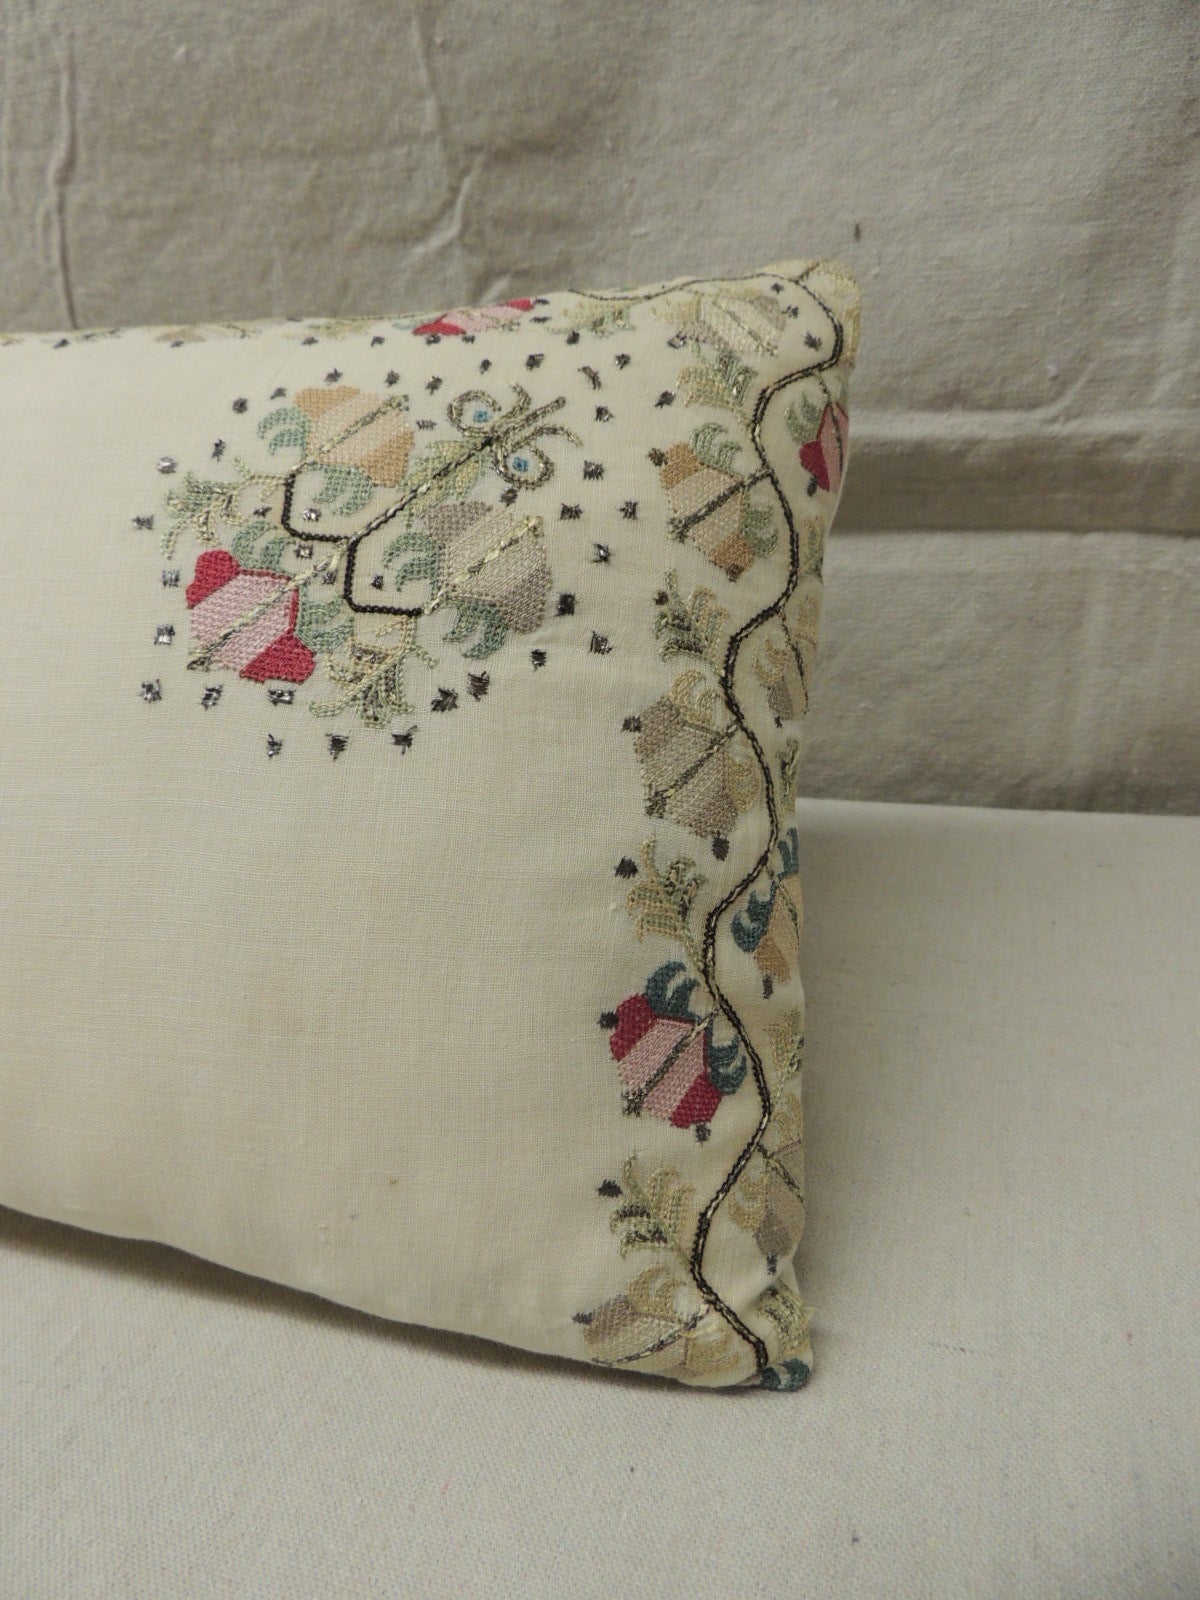 This item is part of our 7Th Anniversary SALE:
Sheer linen embroidery Turkish long bolster pillow silk and metallic threads on linen. In shades of soft green, reds, pinks, celedon, camel. Natural linen backing.  Throw pillow hand-made and designed